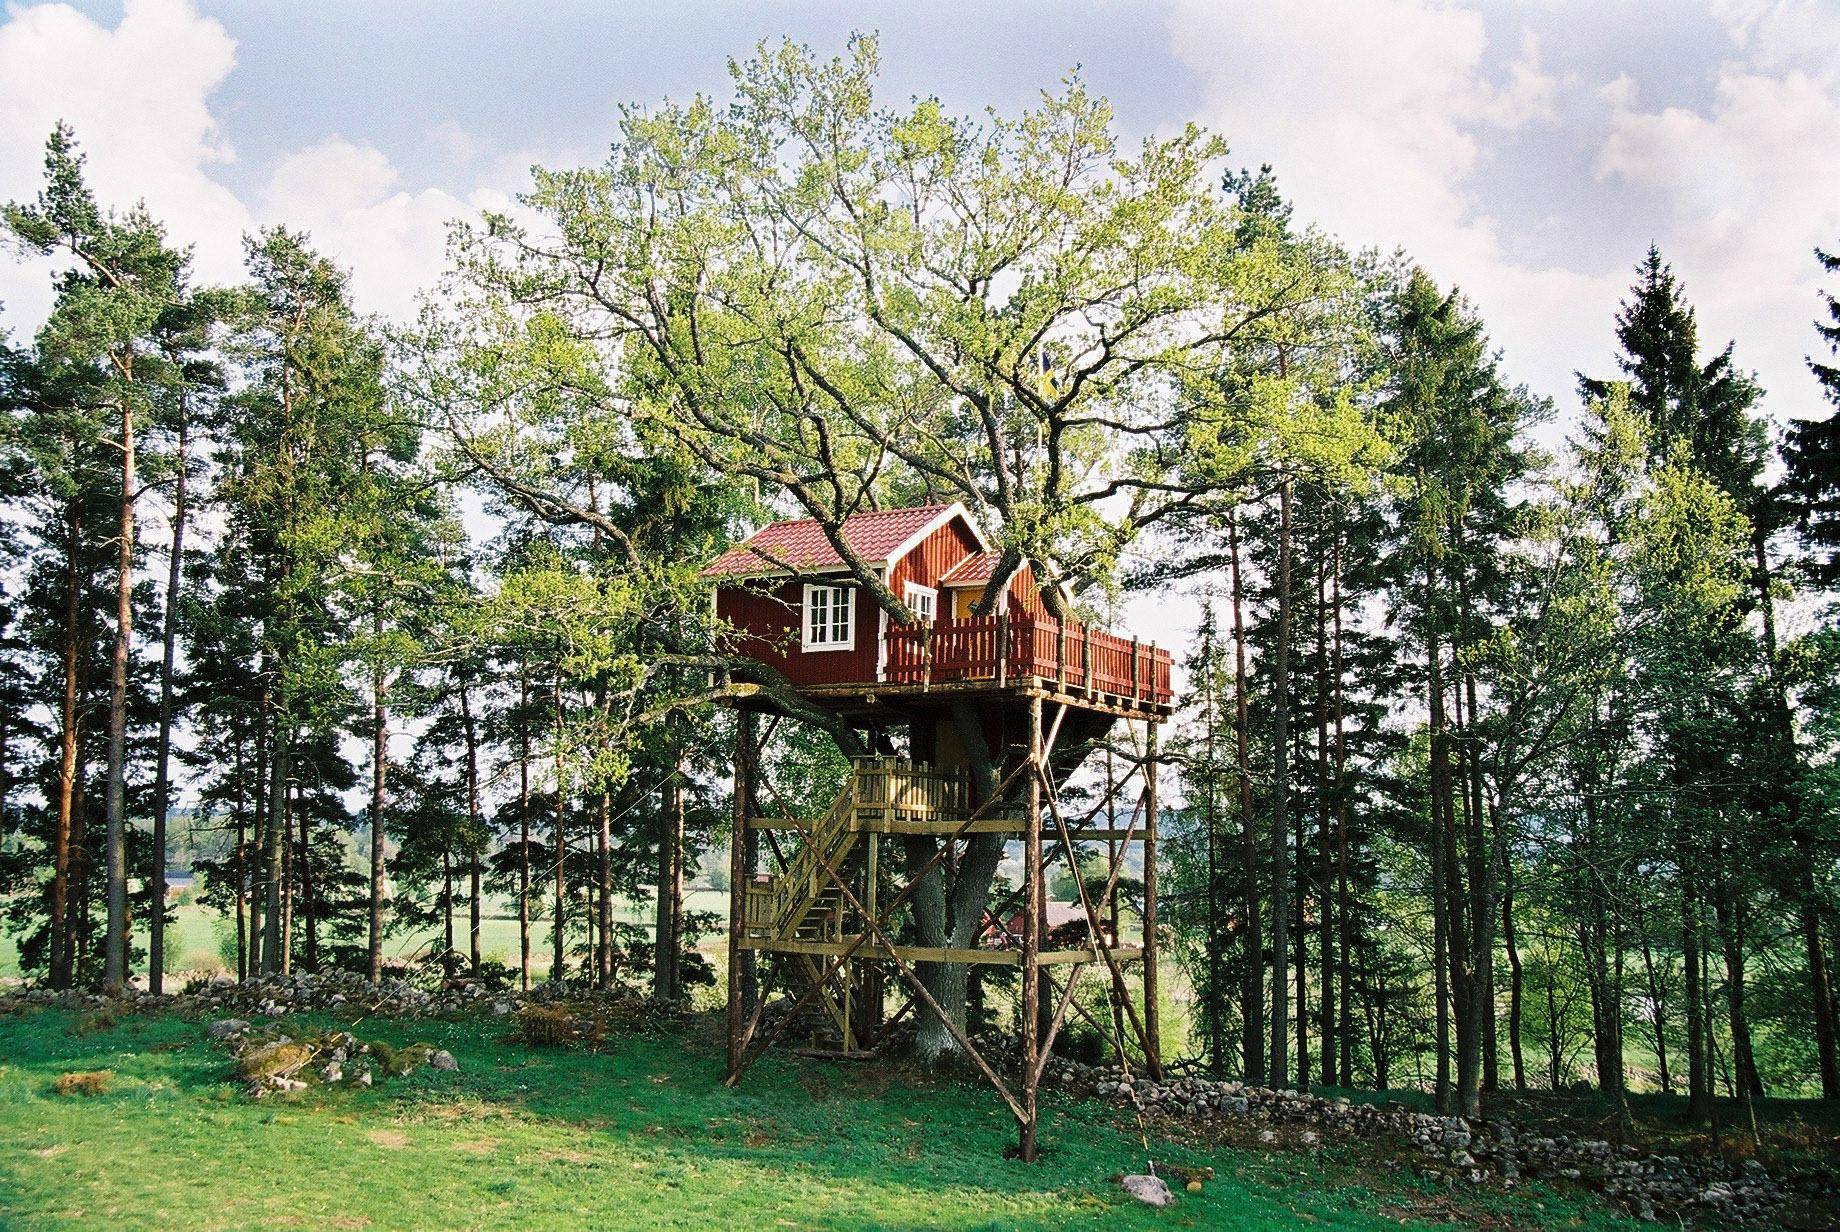 A red tree house 6,5 meters up among the branches of an oak tree. It got a red fens an a wooden staircase.